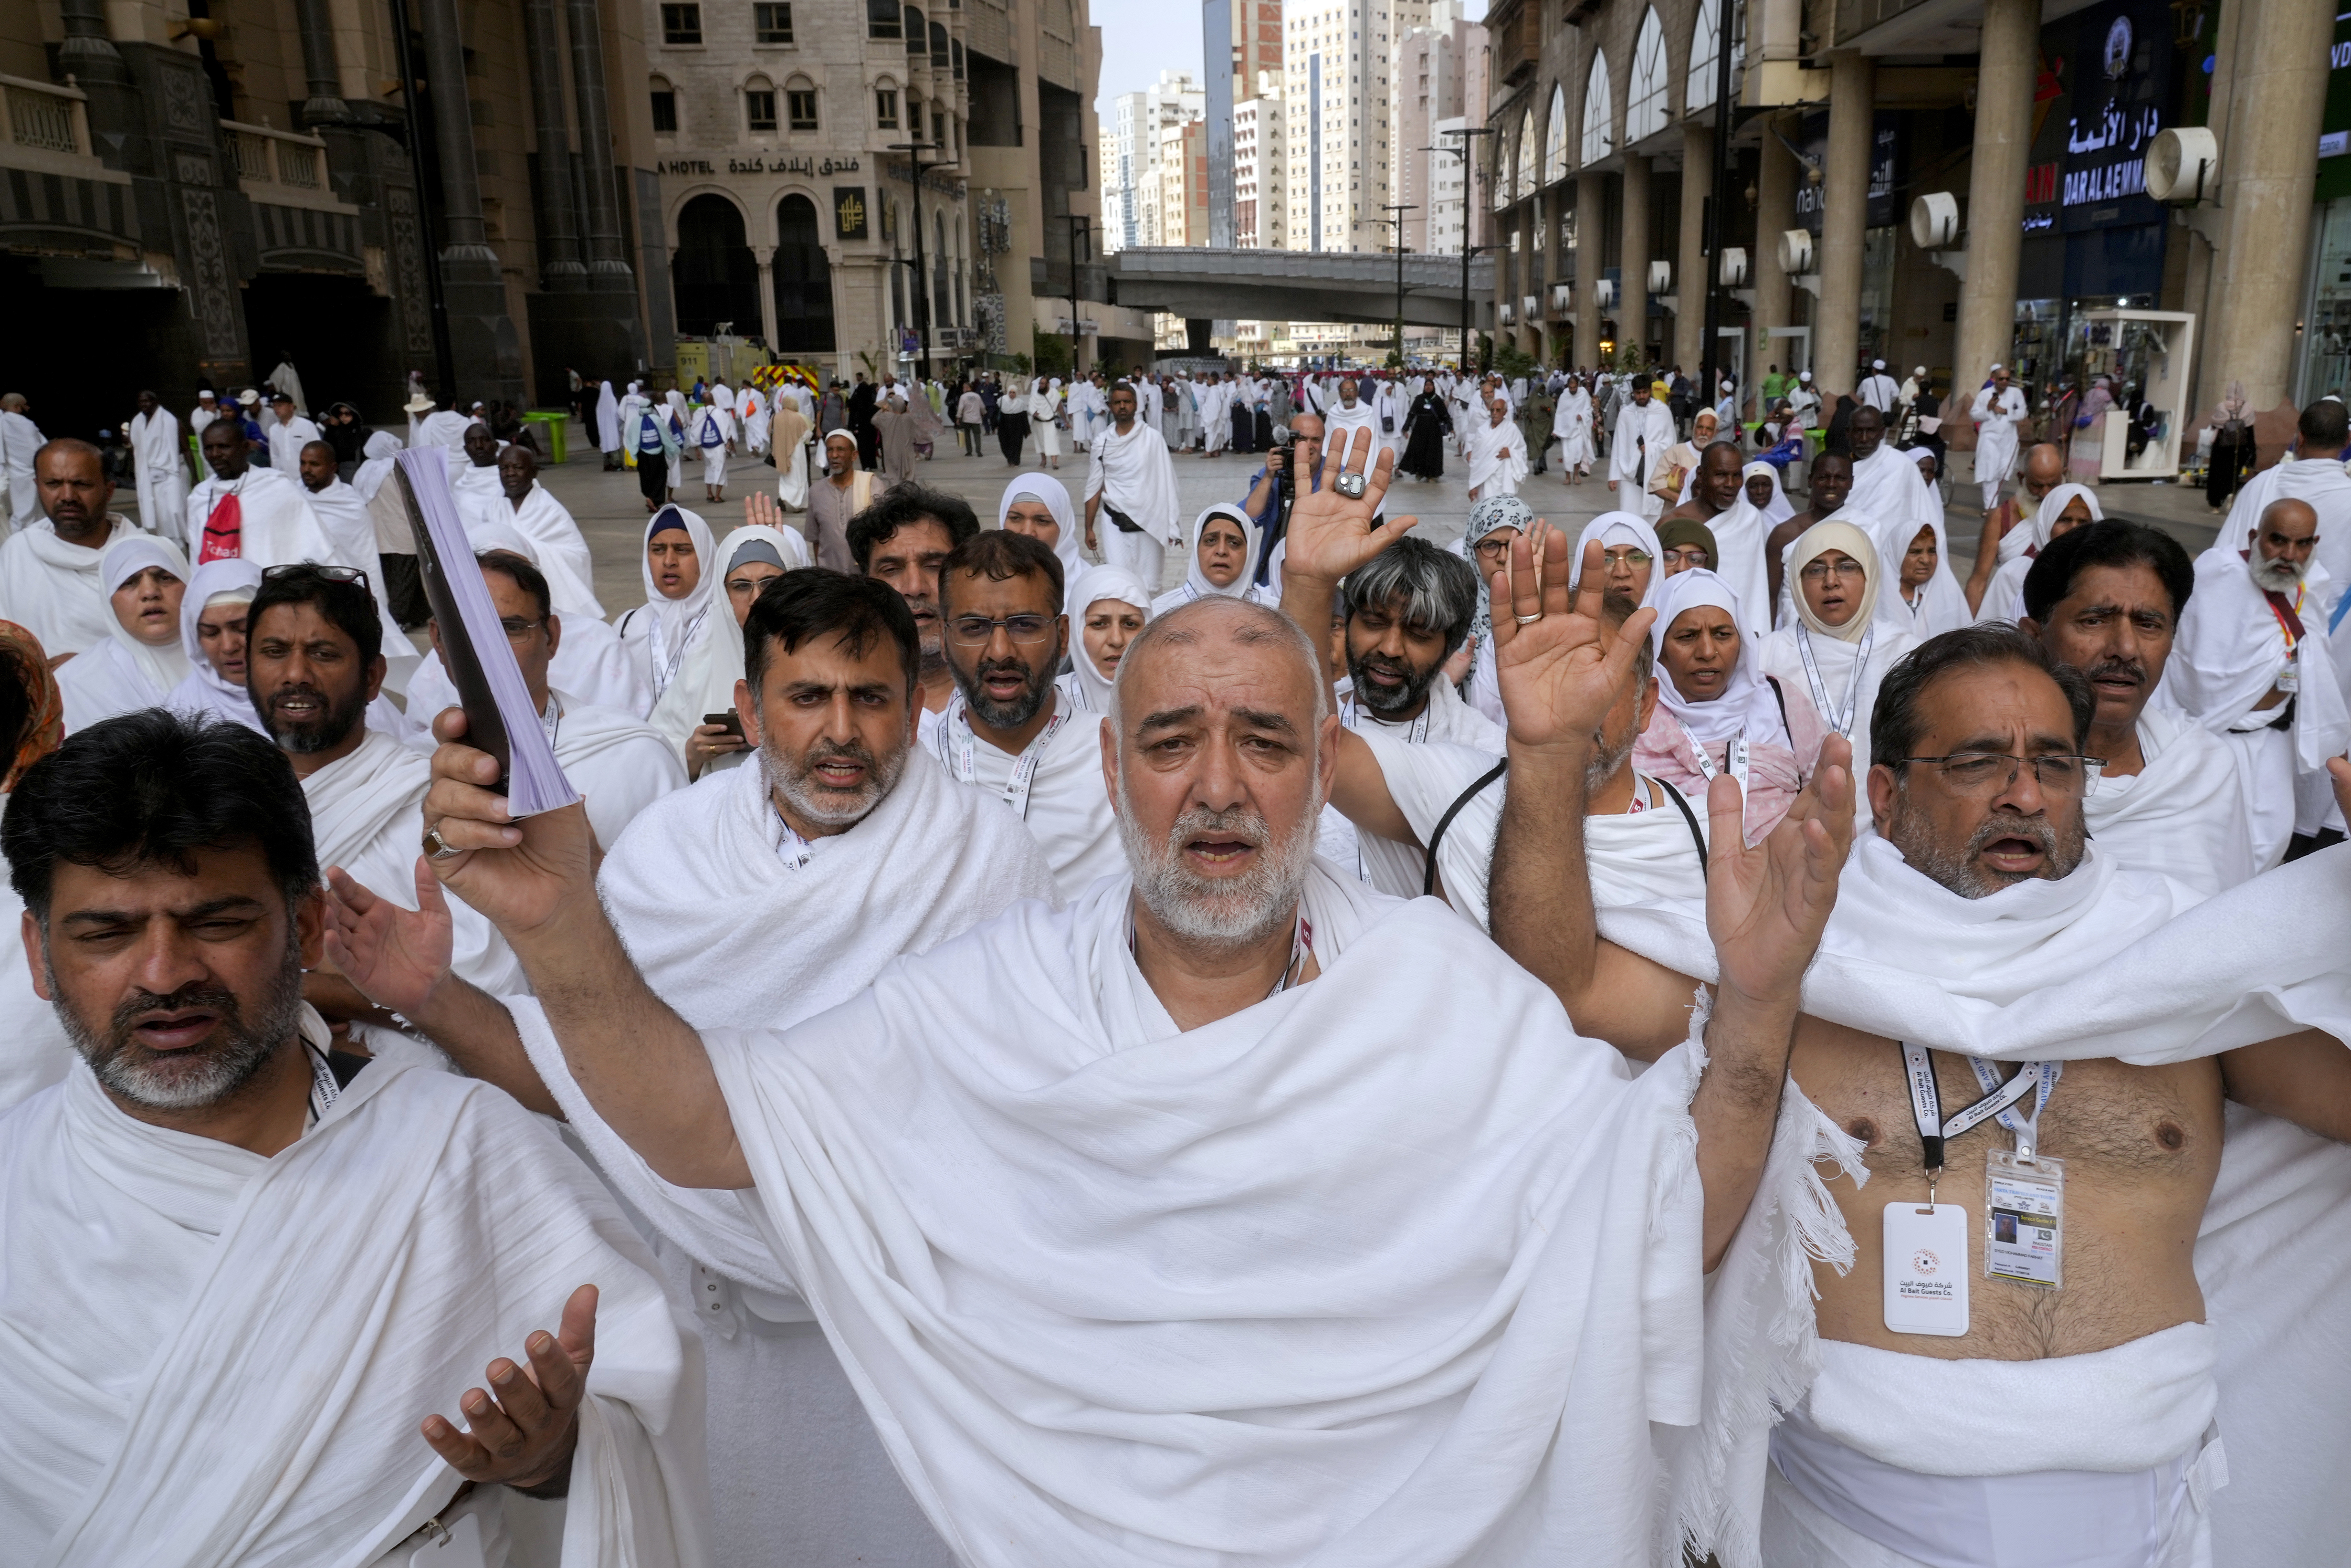 Muslim pilgrims are converging on Saudi Arabia's holy city of Mecca for the largest hajj since the coronavirus pandemic severely curtailed access to one of Islam's five pillars. This article will explain the pilgrimage they undertake and its significance.